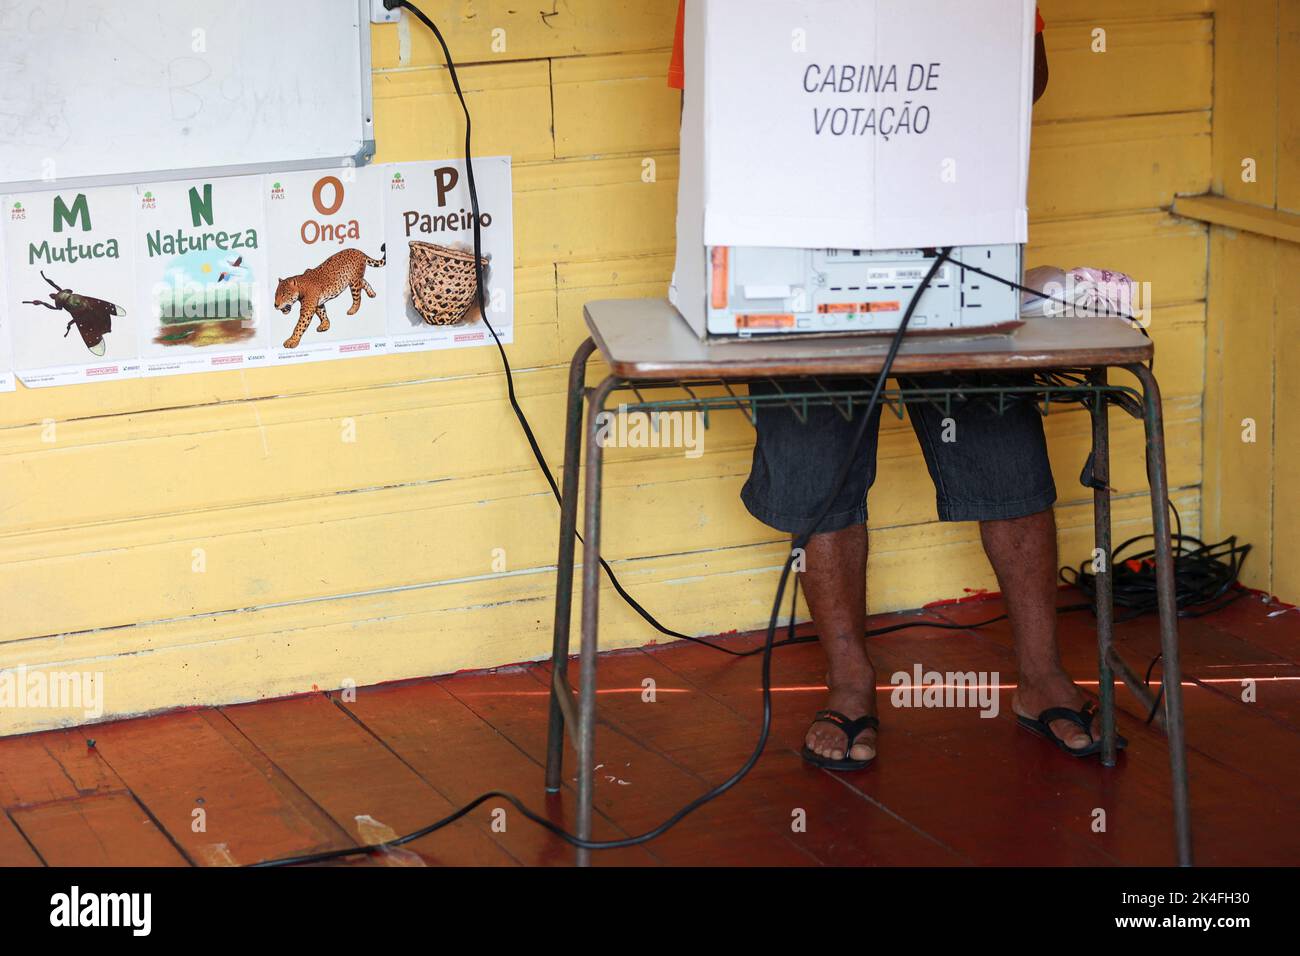 A man casts his vote at a polling station set up on a floating school on the Negro river, in the Catalao Community, Brazil October 2, 2022. REUTERS/Bruno Kelly Stock Photo